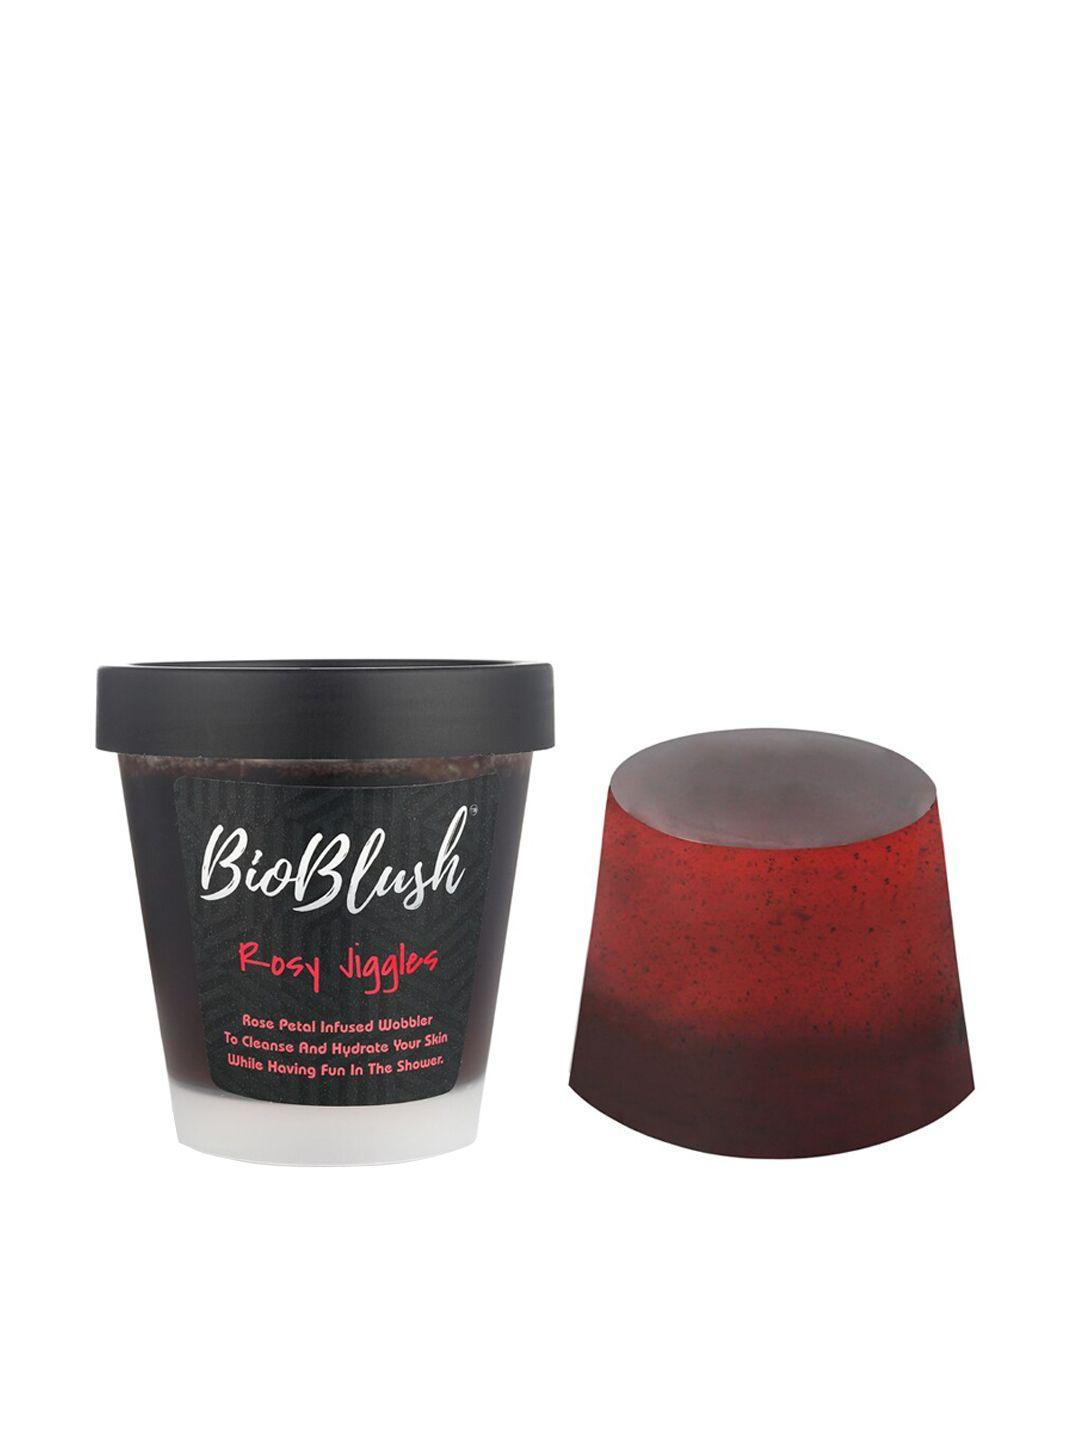 bioblush rosy jiggles rose shower jelly